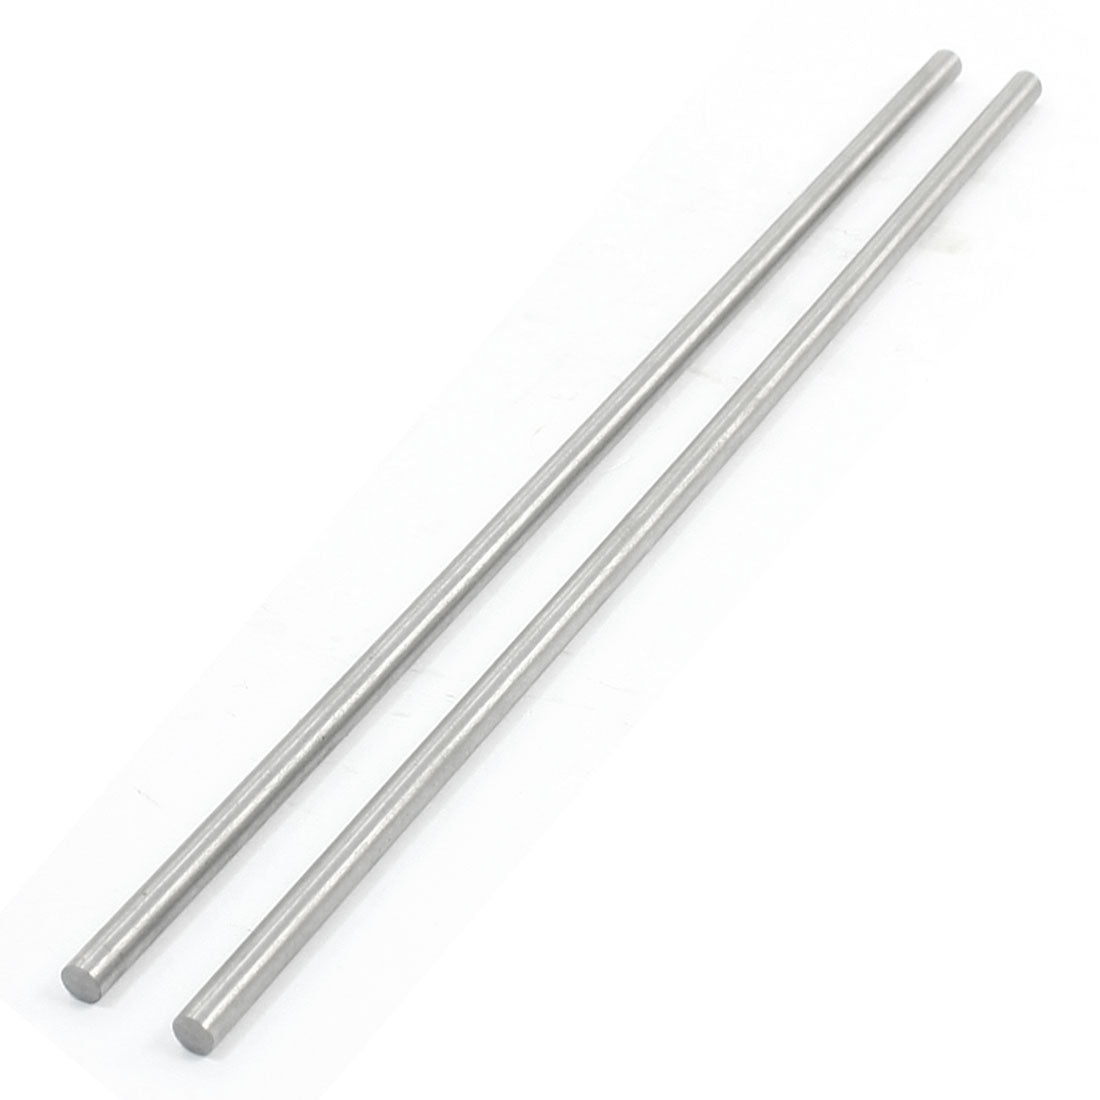 Uxcell Uxcell 2 Pcs HSS High Speed Steel Round Turning Lathe Bars 4mm x 100mm